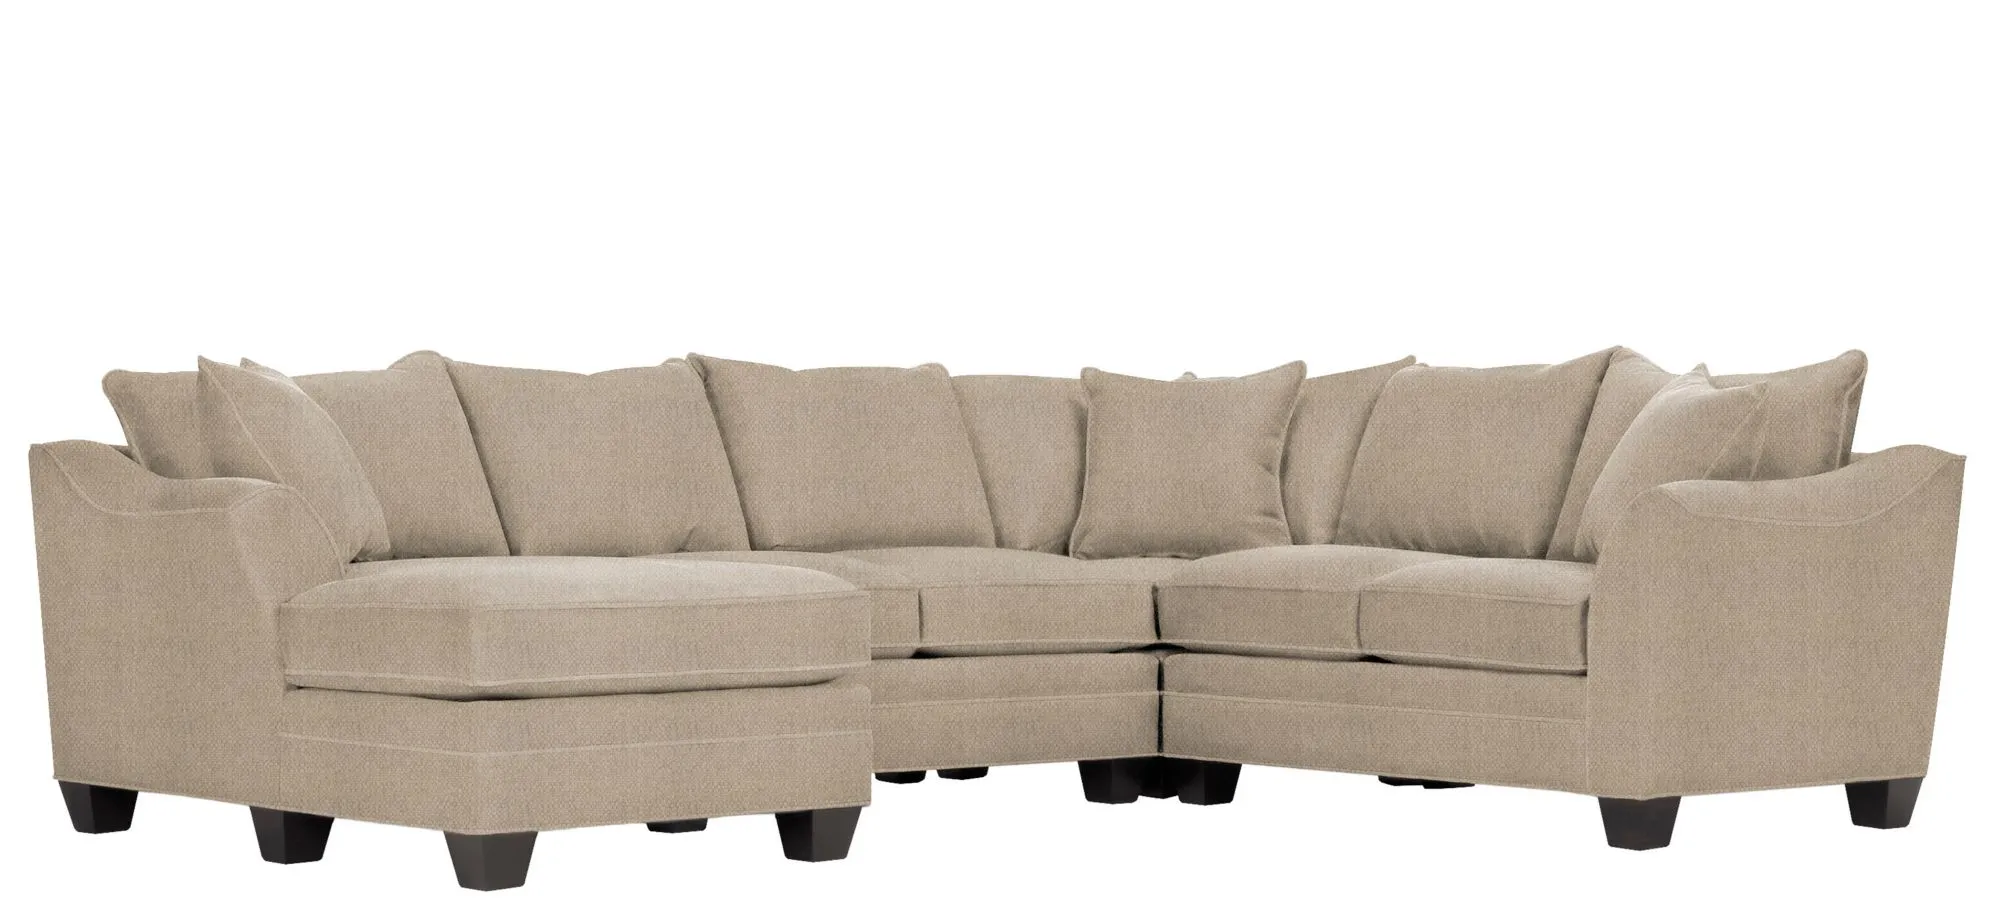 Foresthill 4-pc. Left Hand Chaise Sectional Sofa in Sugar Shack Putty by H.M. Richards